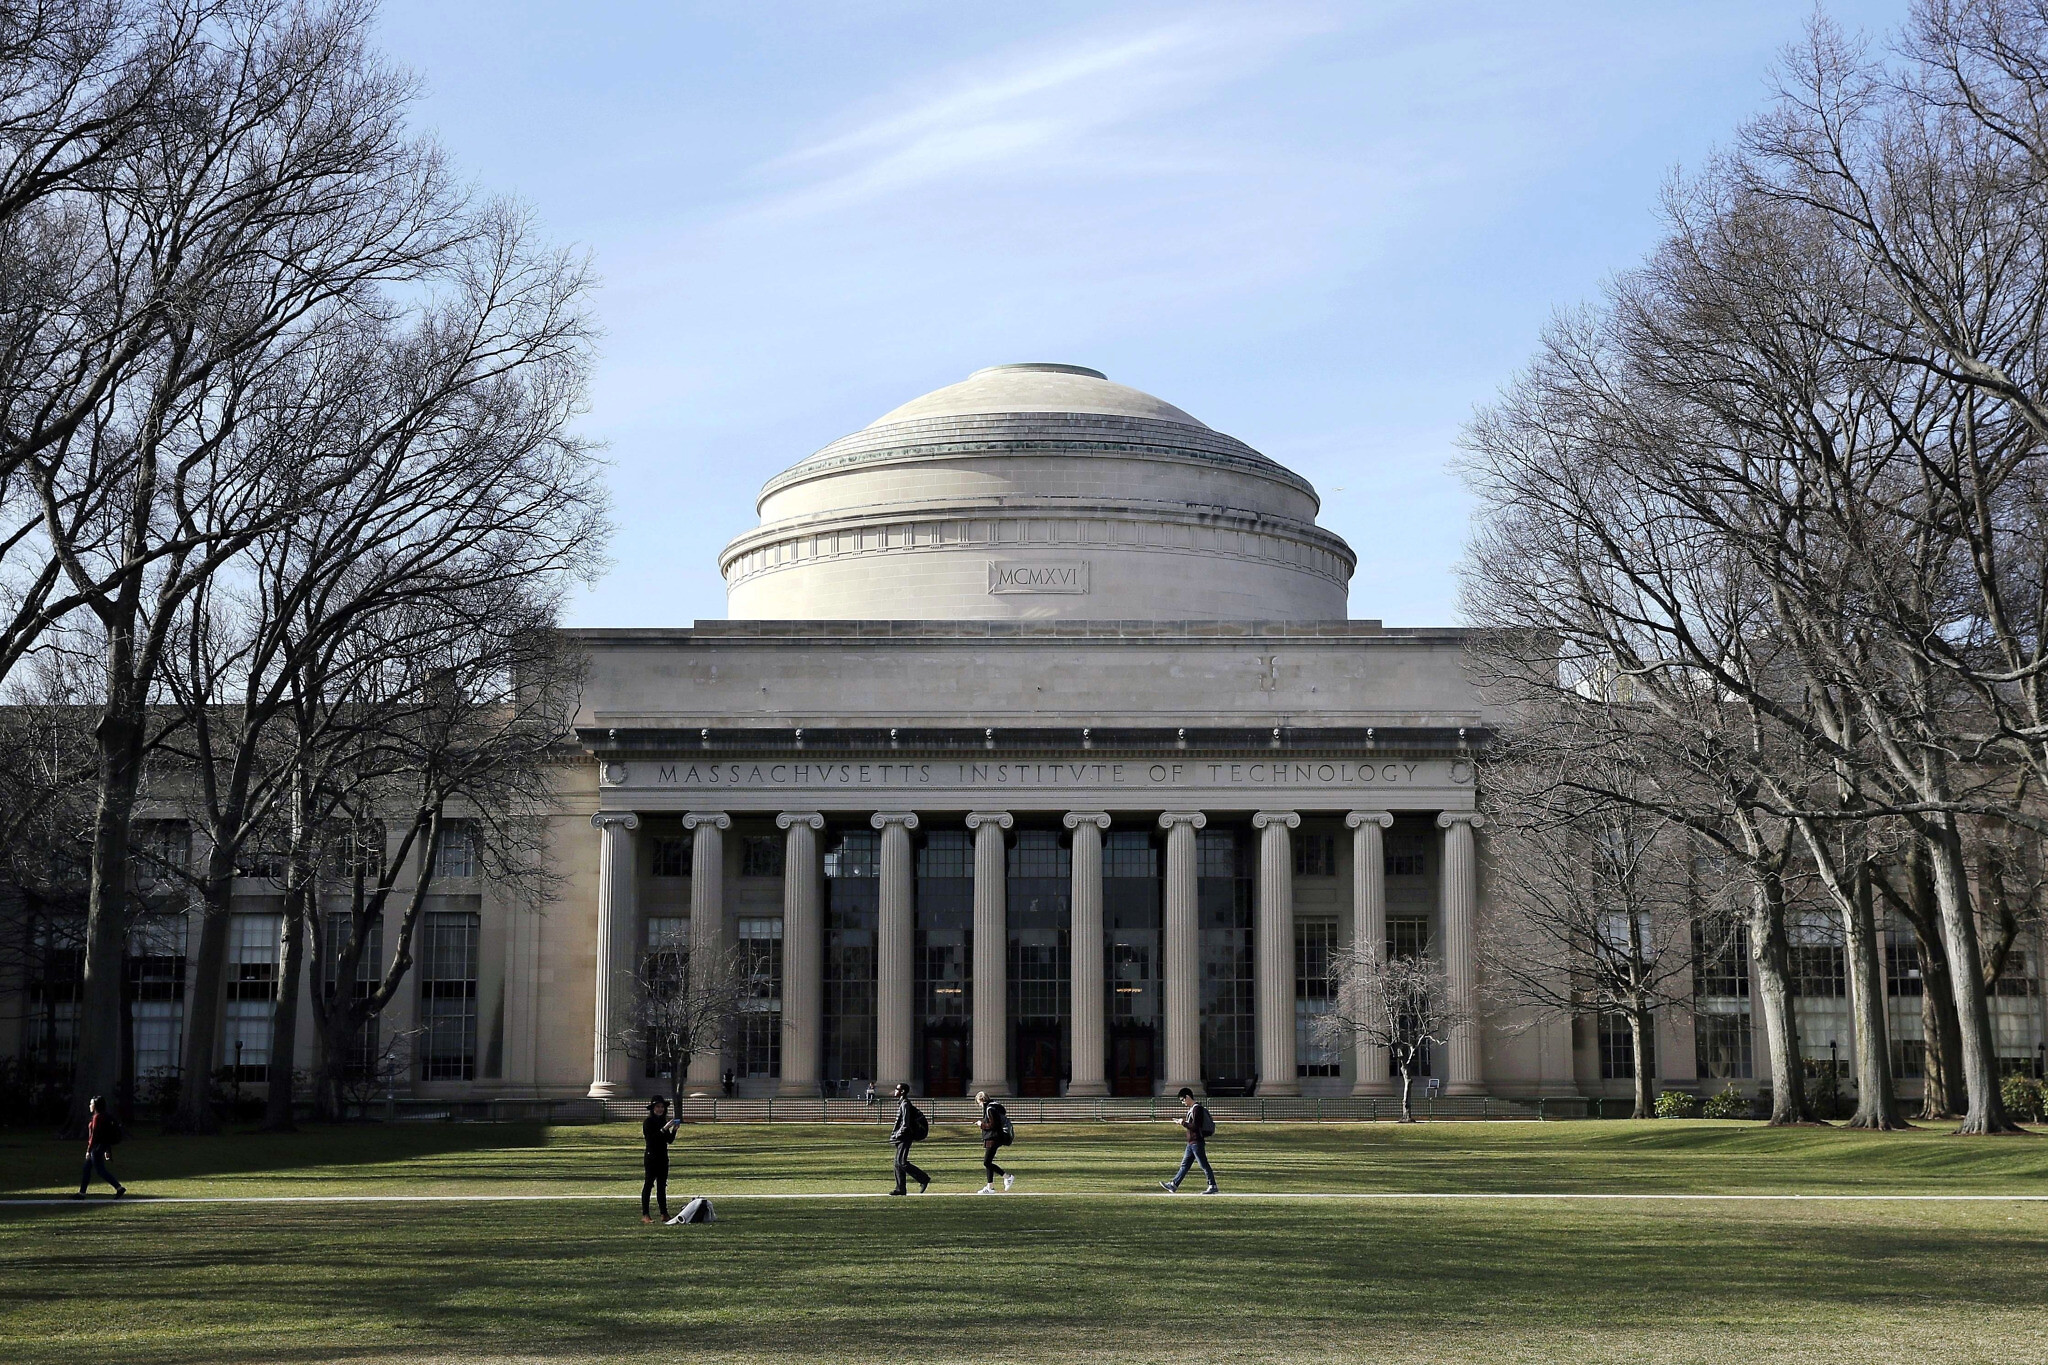 Two Jewish students file federal lawsuit against MIT over campus antisemitism